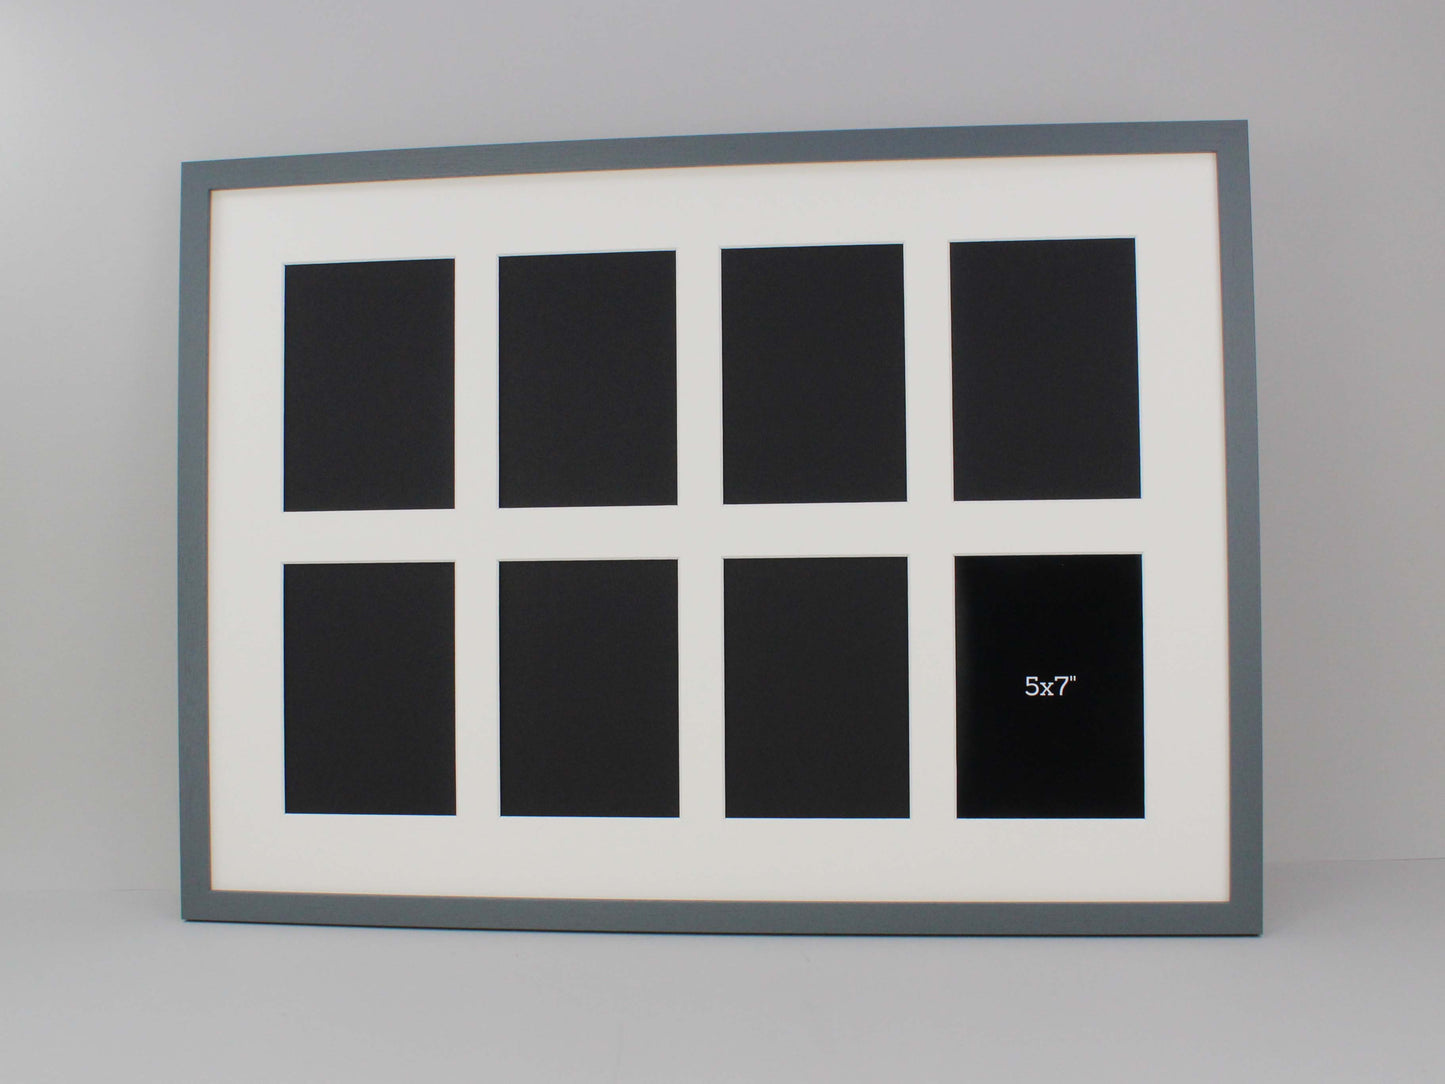 Suits Eight 5x7" sized Photos. 50x70cm. Wooden Multi Aperture / Collage Photo Frame.